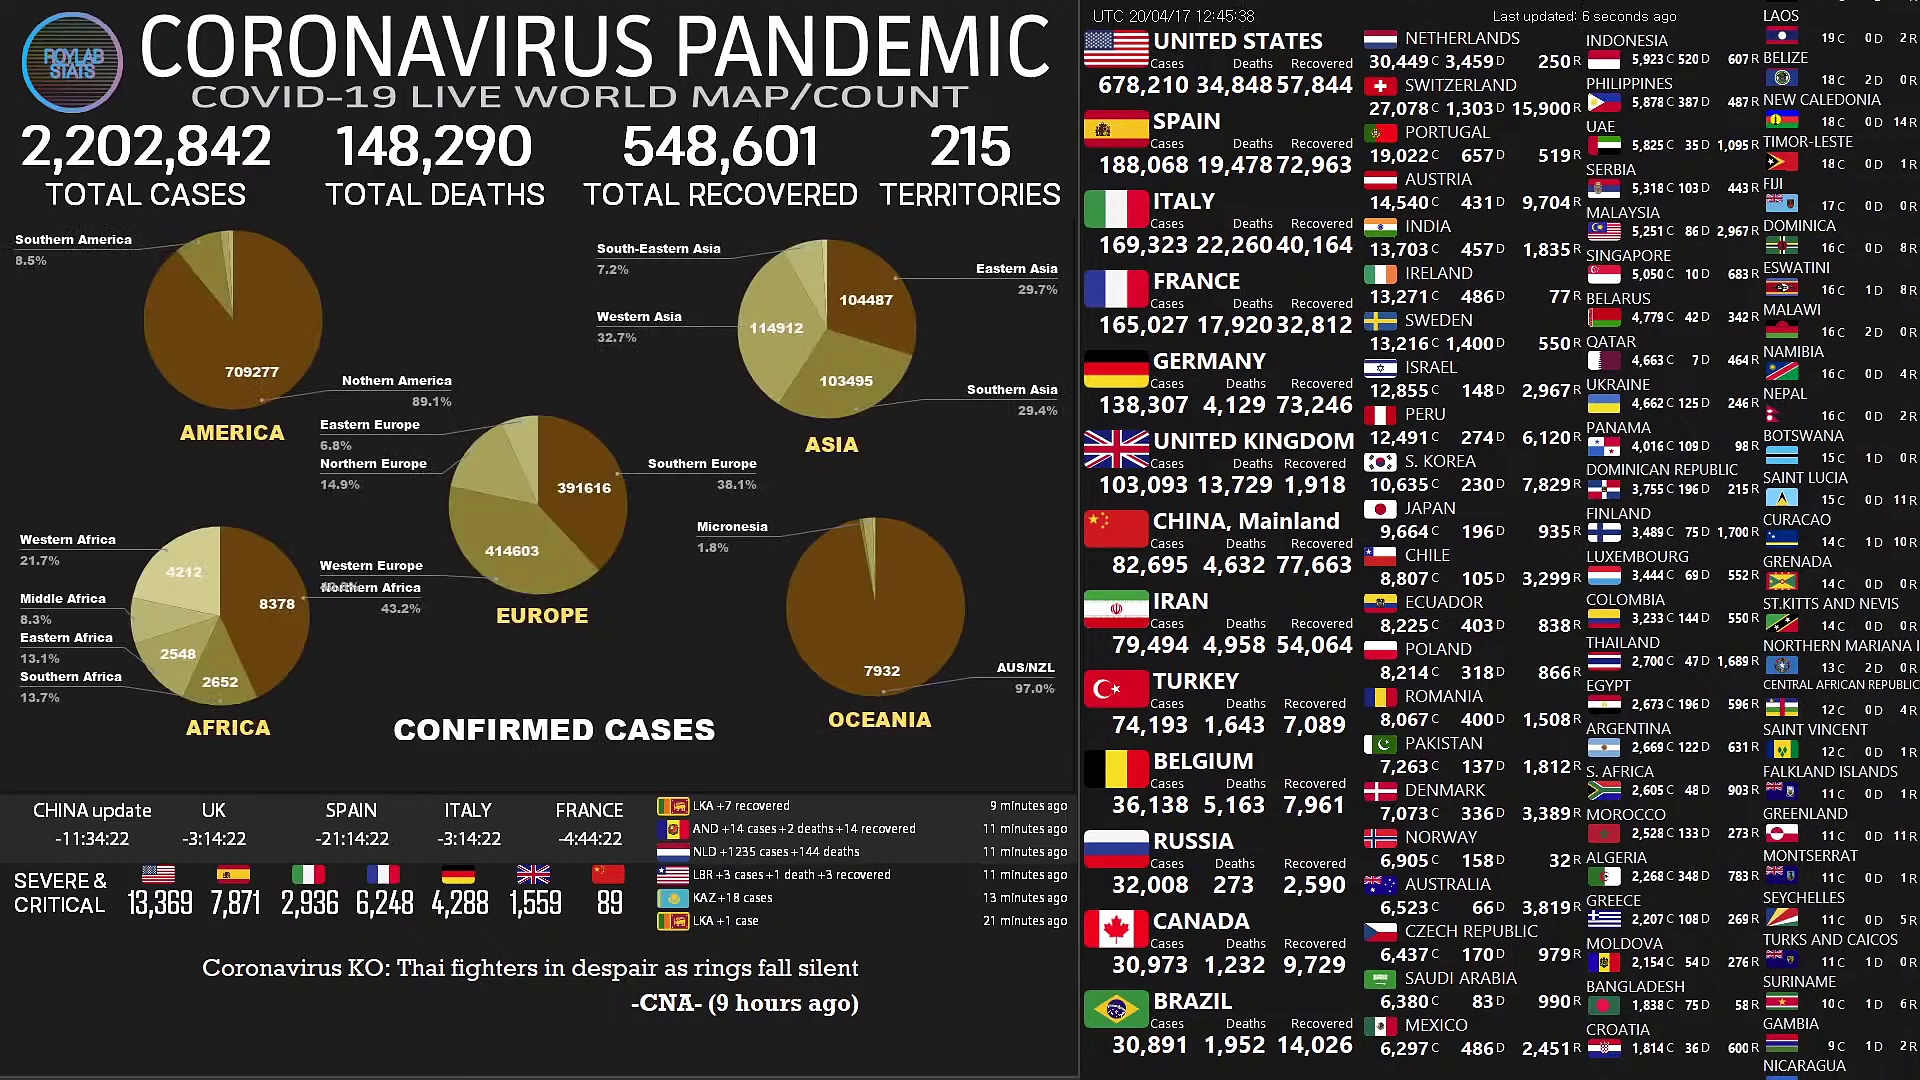 [LIVE-ENDED] Coronavirus Pandemic- Real Time Counter, World Map, News